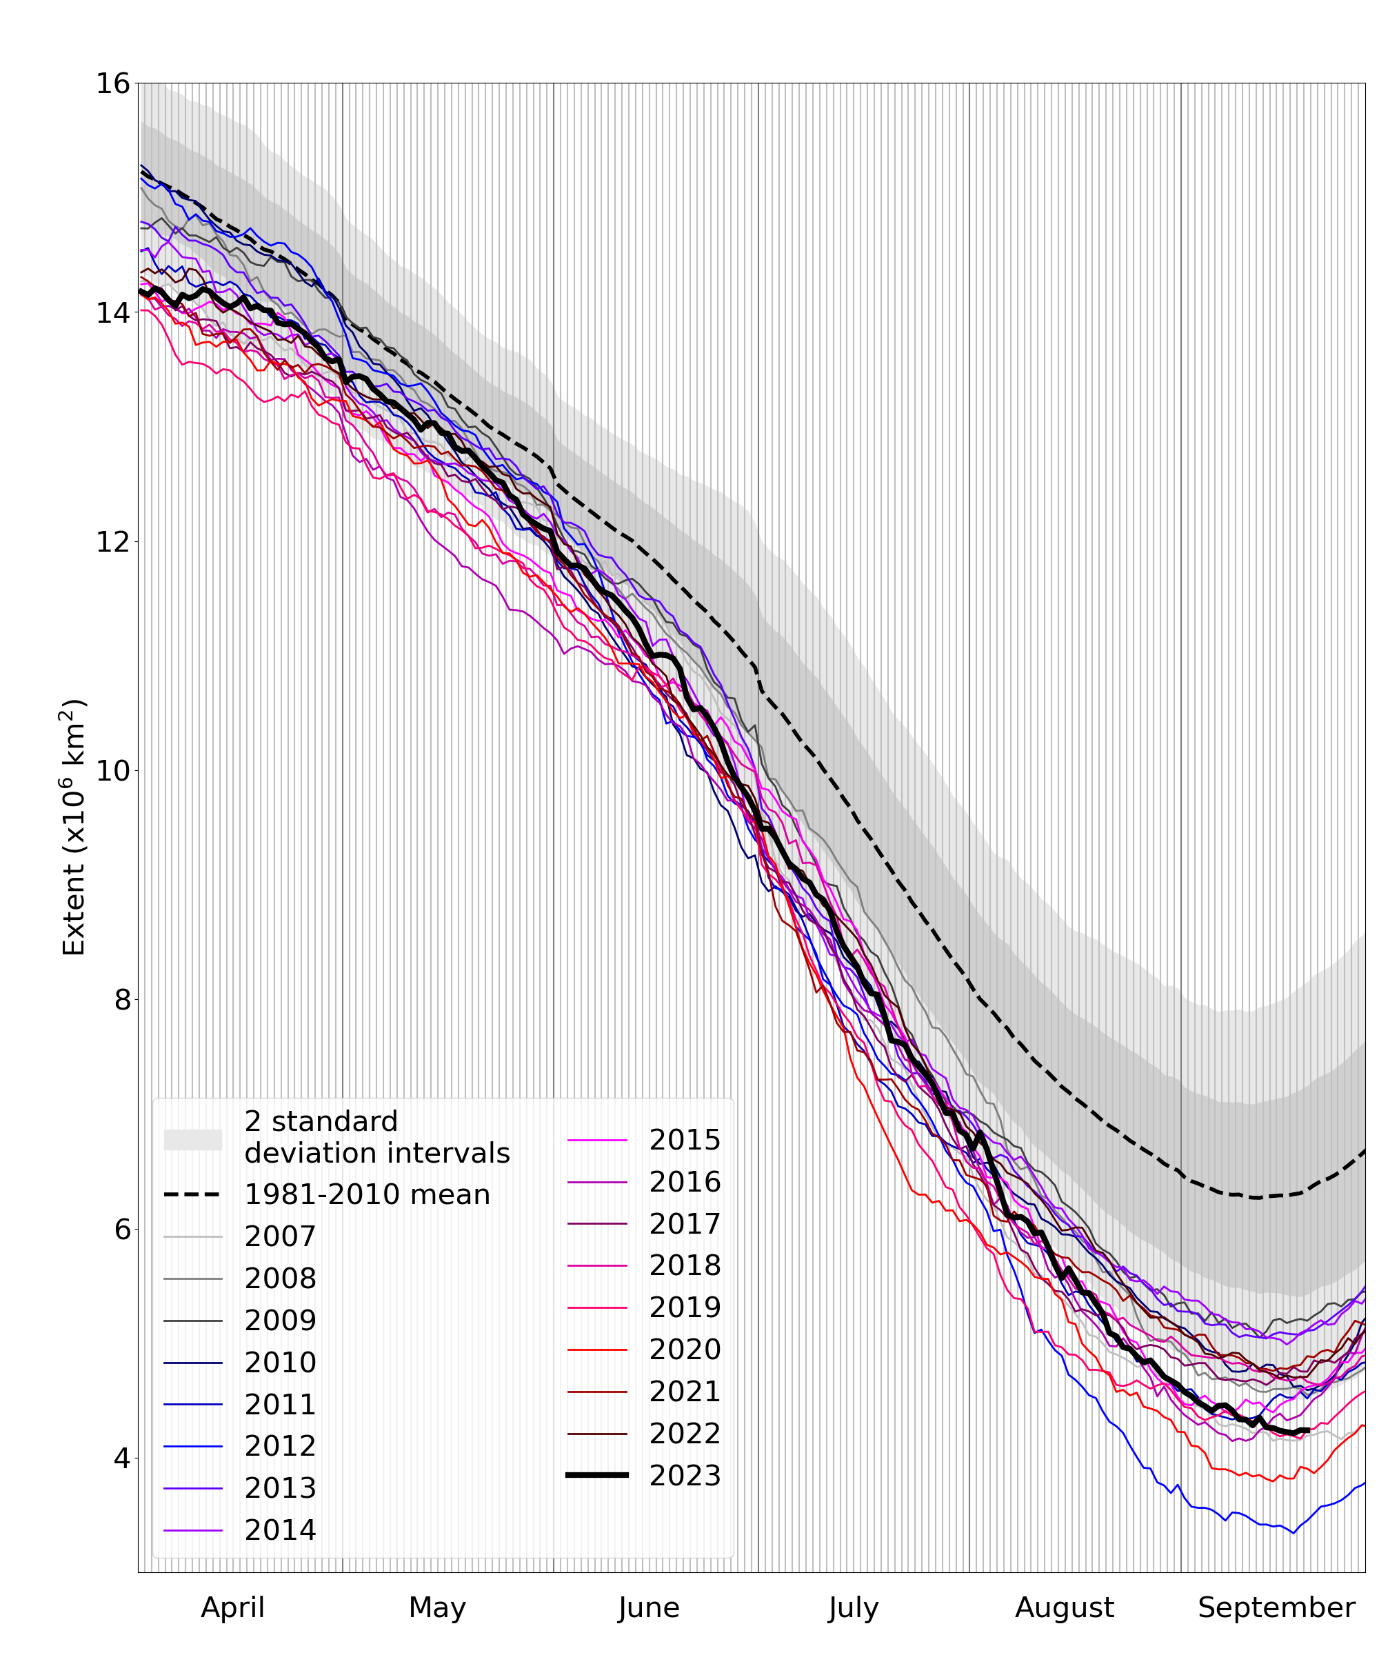 Daily Arctic sea ice extent for 2023, compared with recent years and the 1981-2010 average, with +/- 1 and 2 standard deviation intervals indicated by the shaded areas. Data are from the National Snow and Ice Data Center (NSIDC).